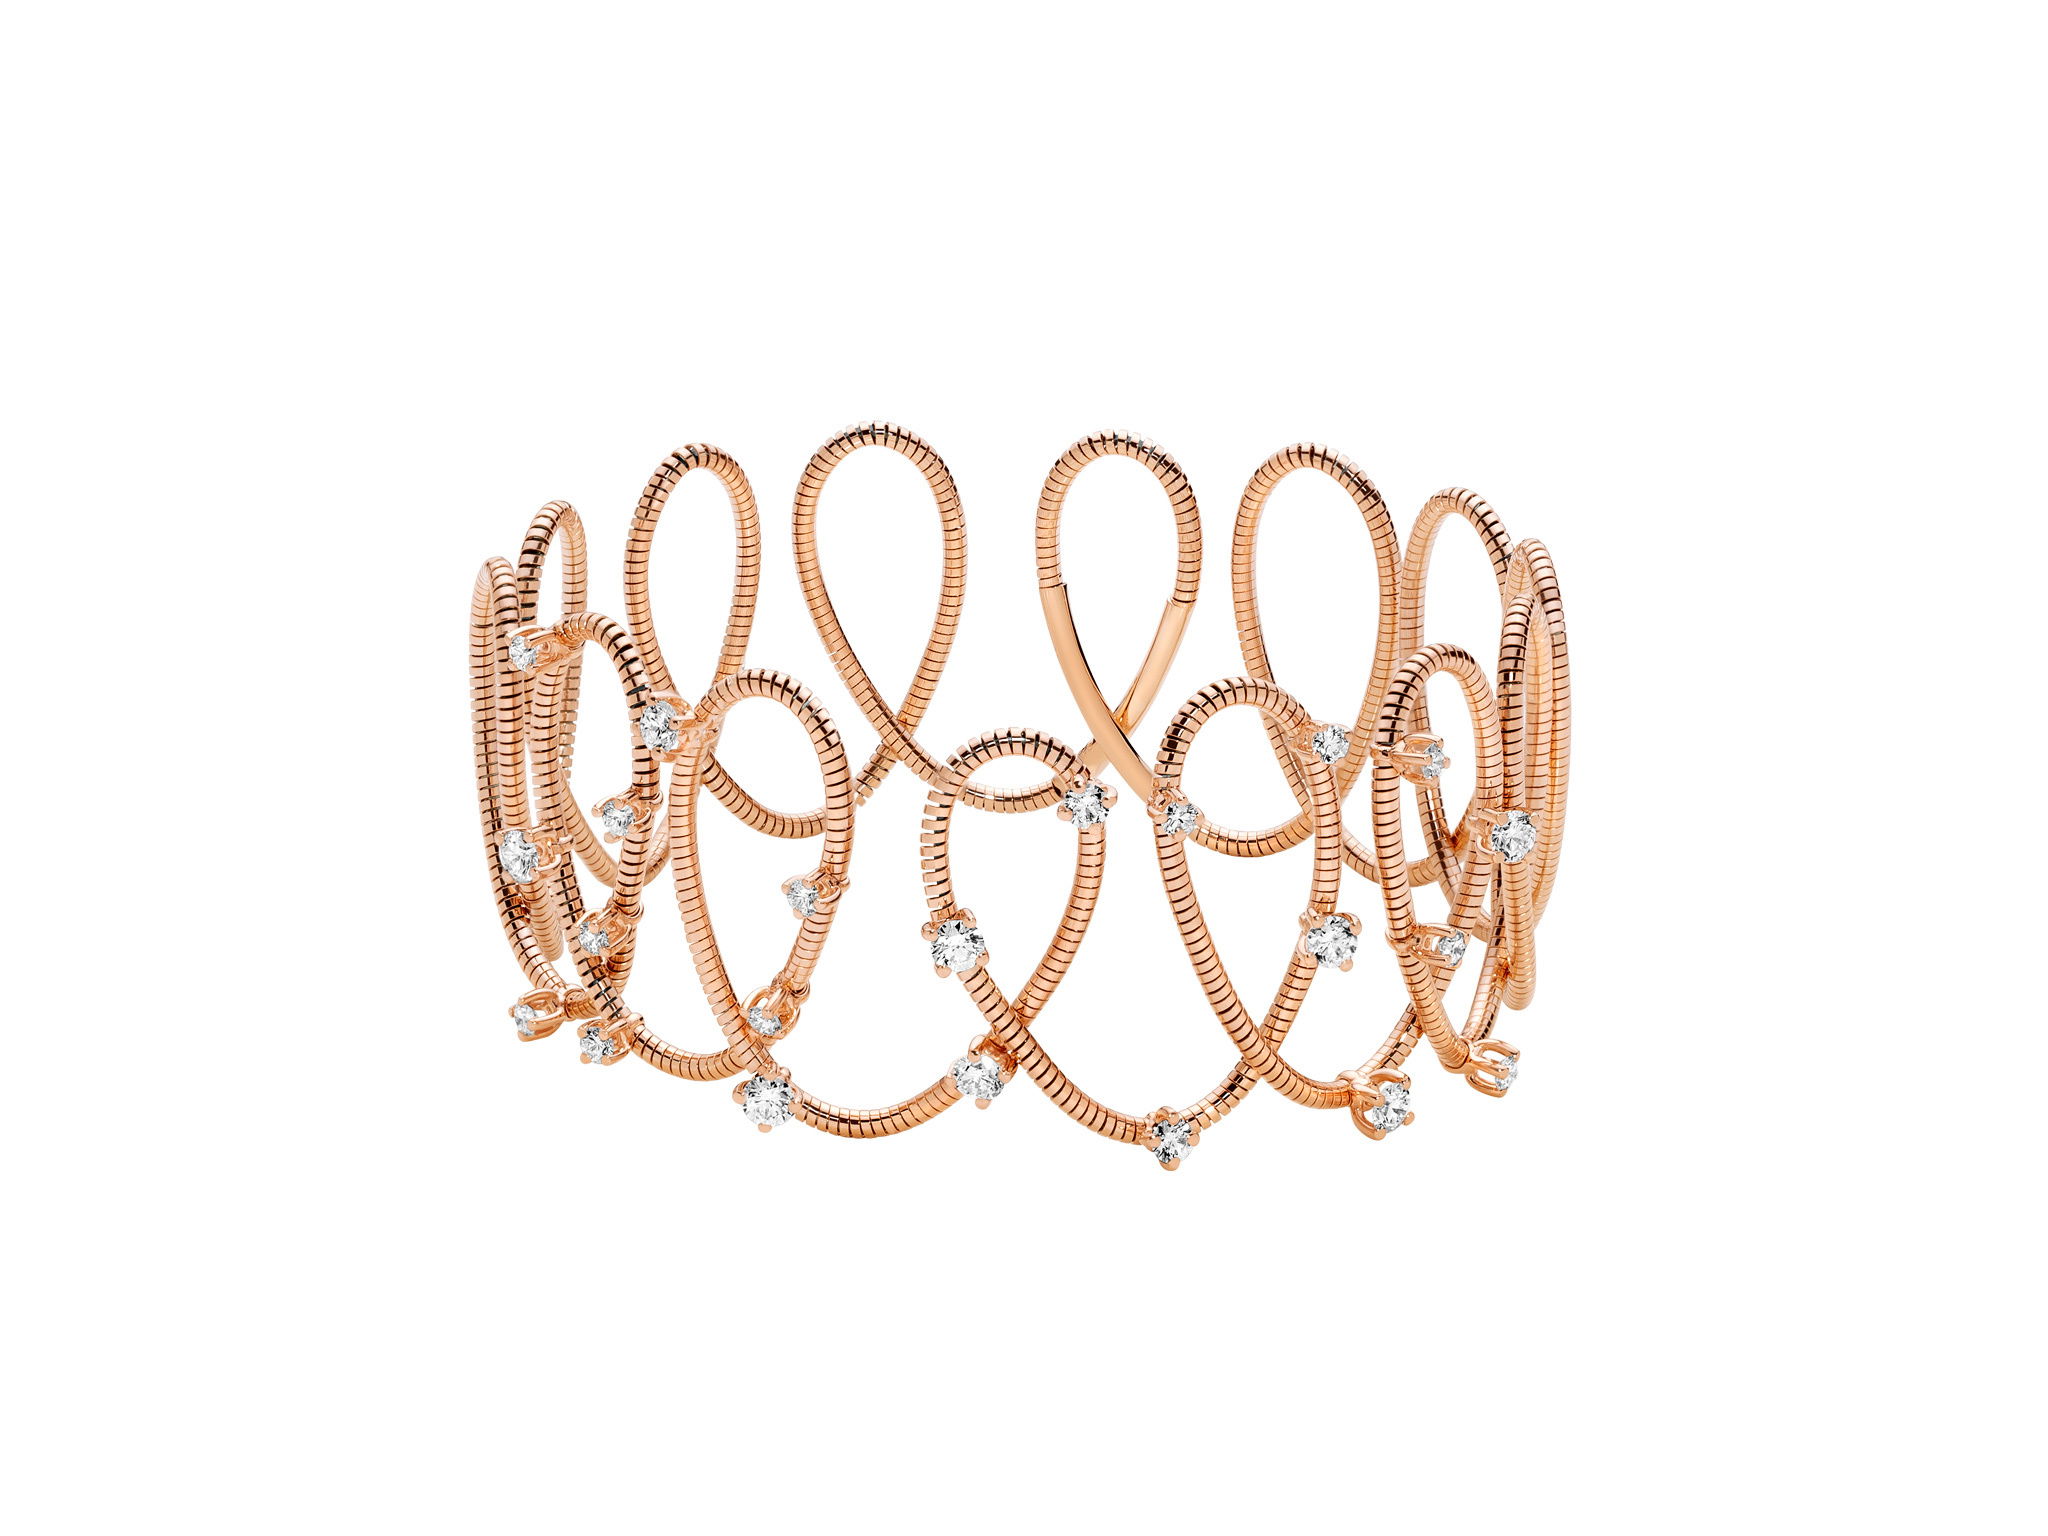 NOVELTIES Crossover Loops Bracelet with White Diamonds in 18kt Pink Gold - One Size